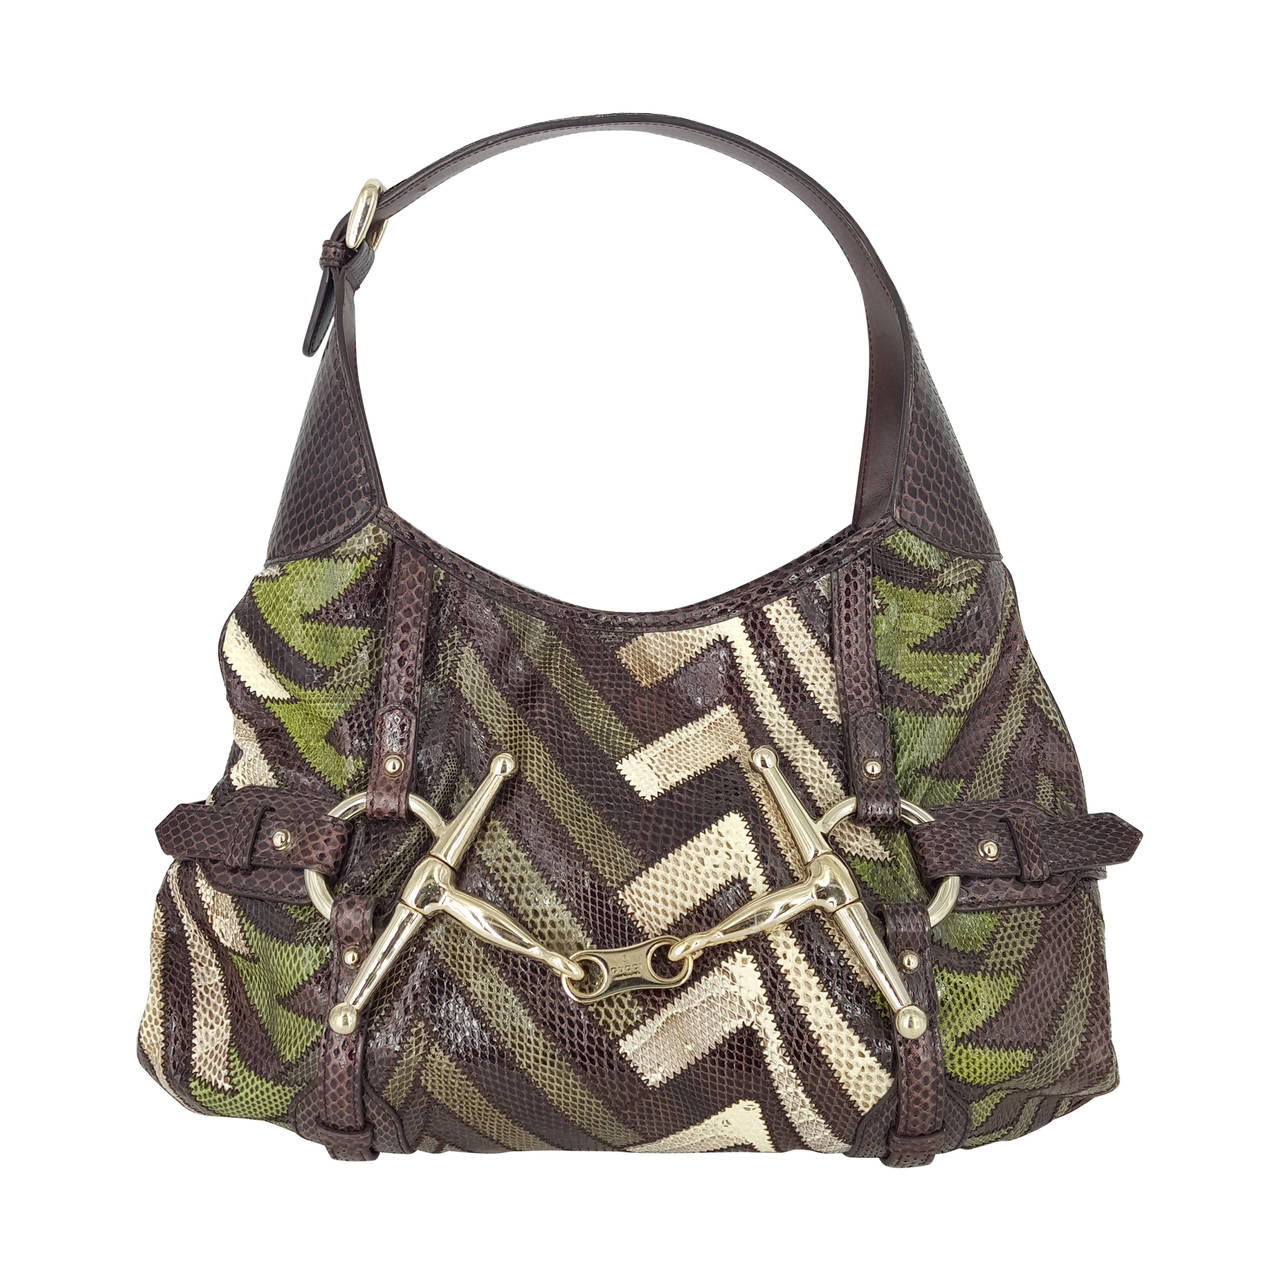 GUCCI Python 85th Anniversary Hobo Bag in Brown, Green and Beige skin. For Sale